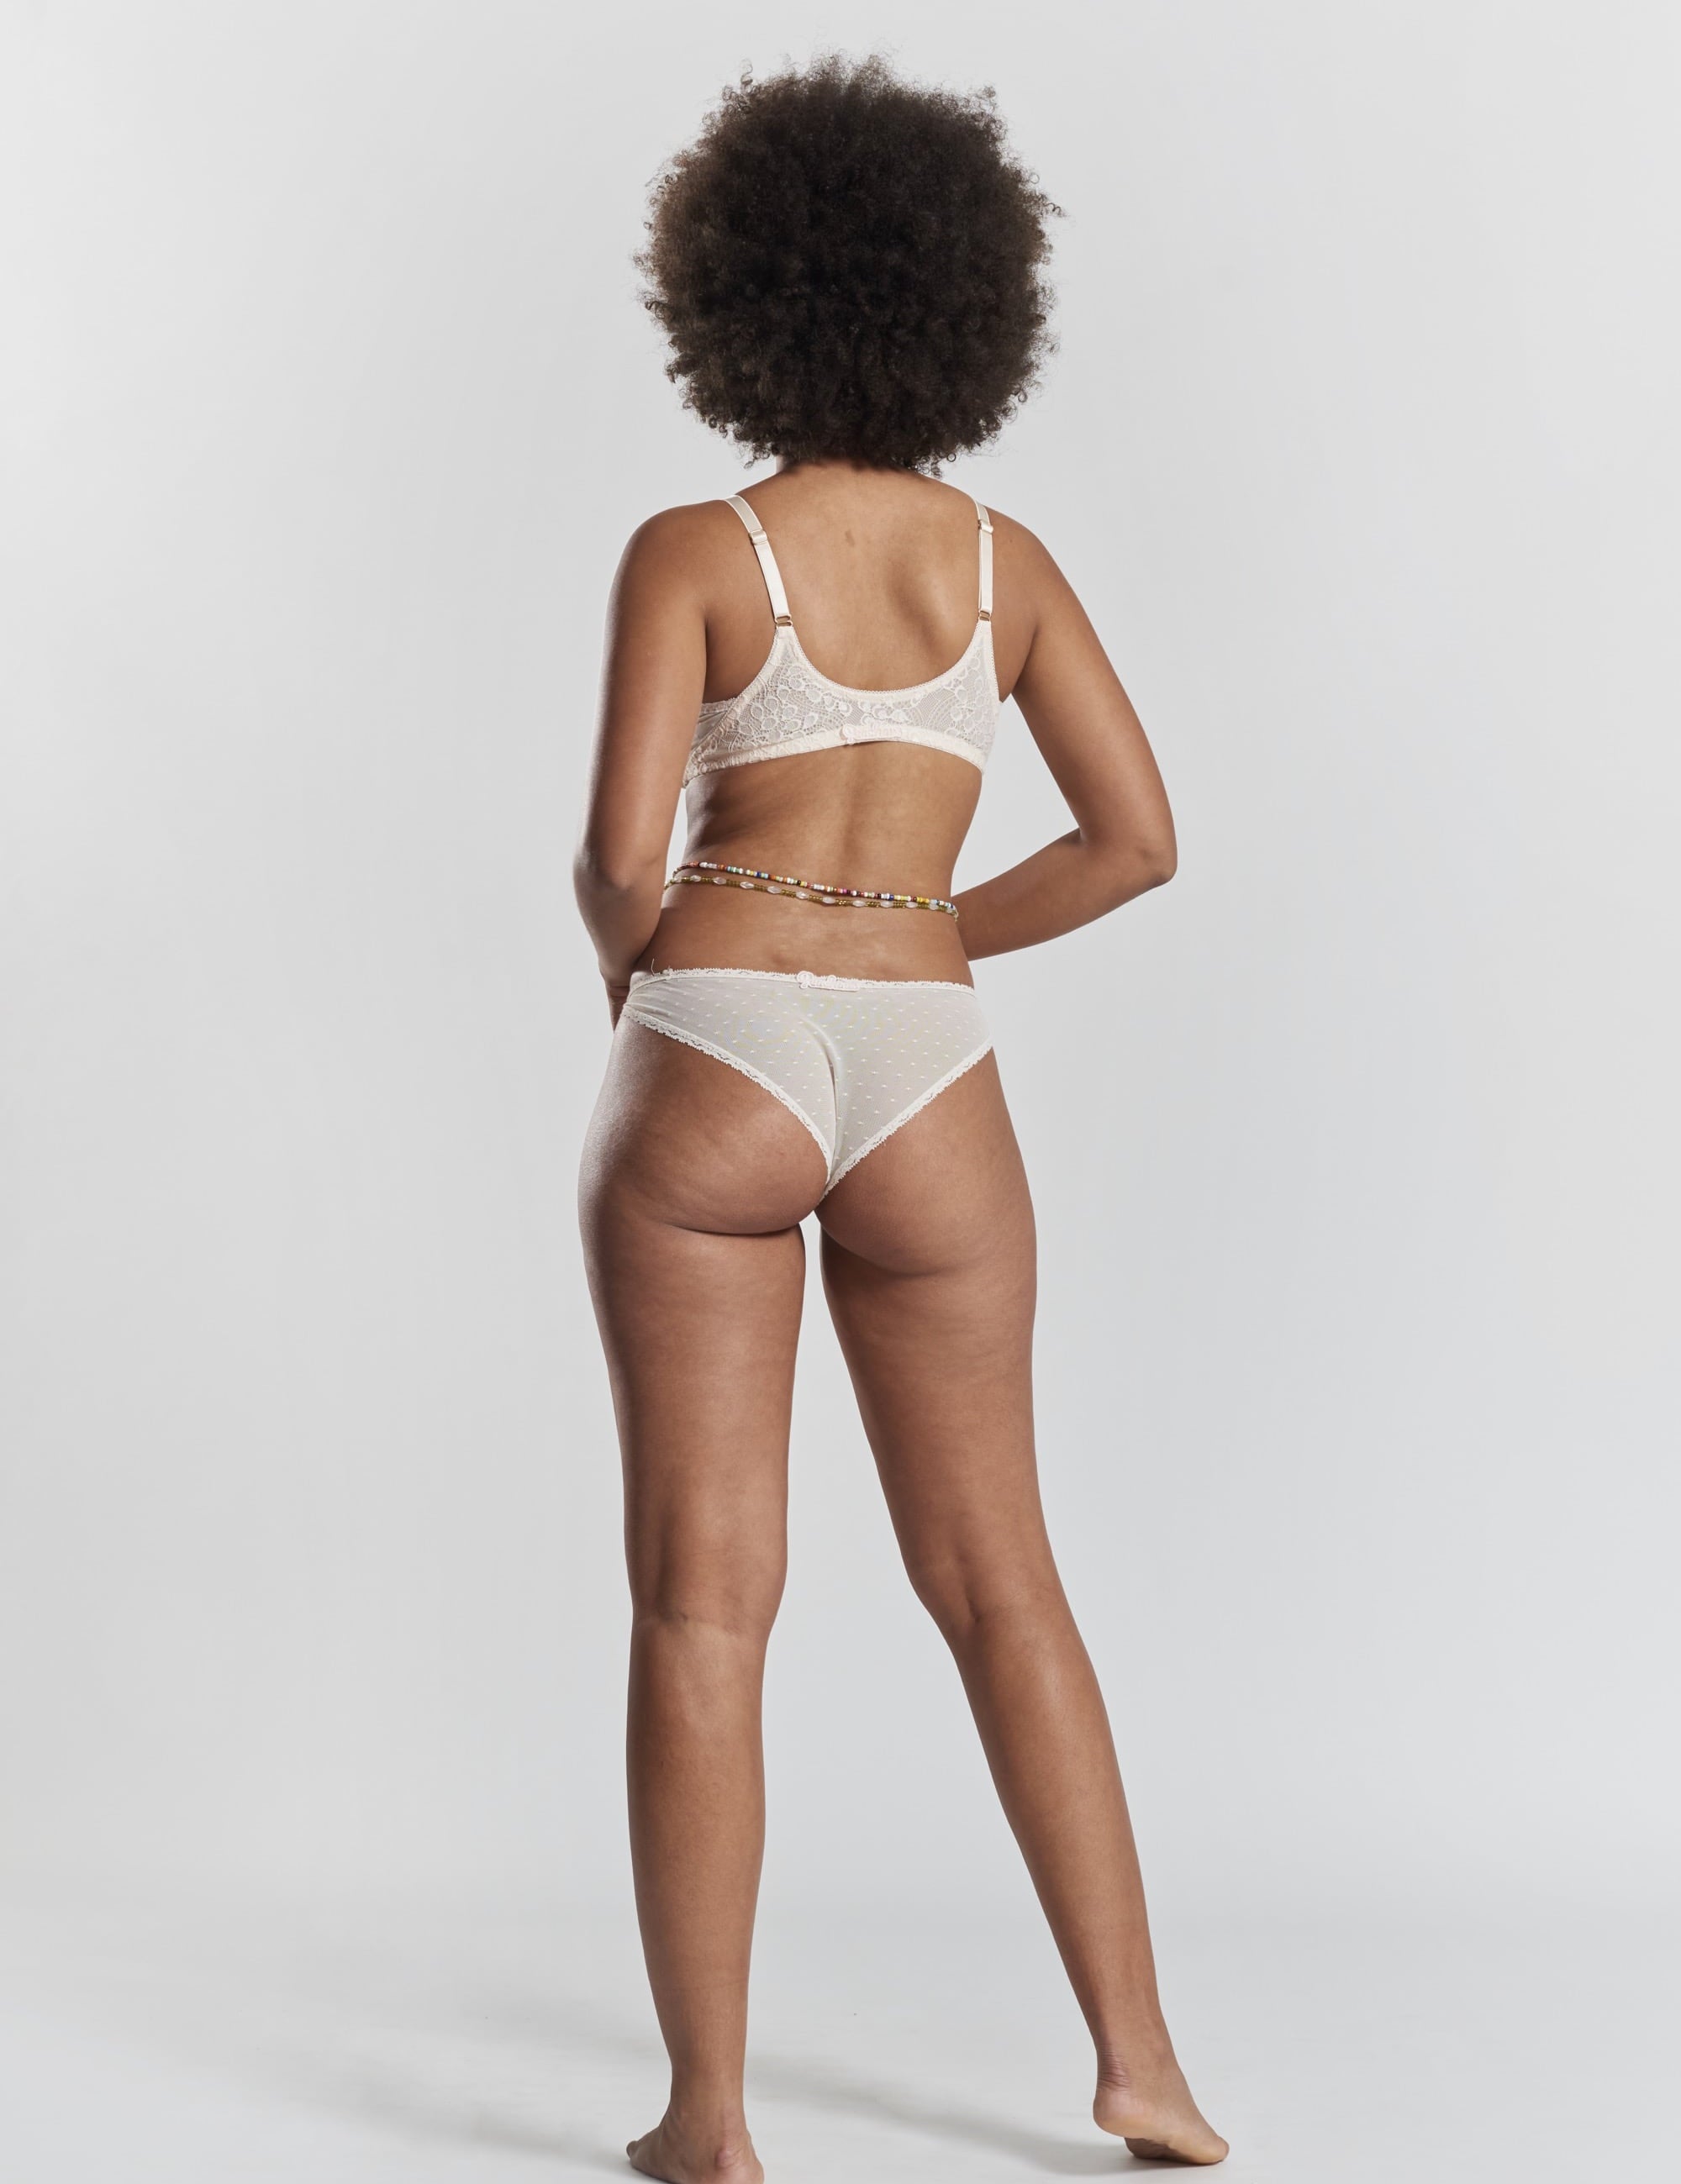 Peachaus low-rise thong peach recycled-lace - Matsu Shoreline Peach -  Ethical and Sustainable